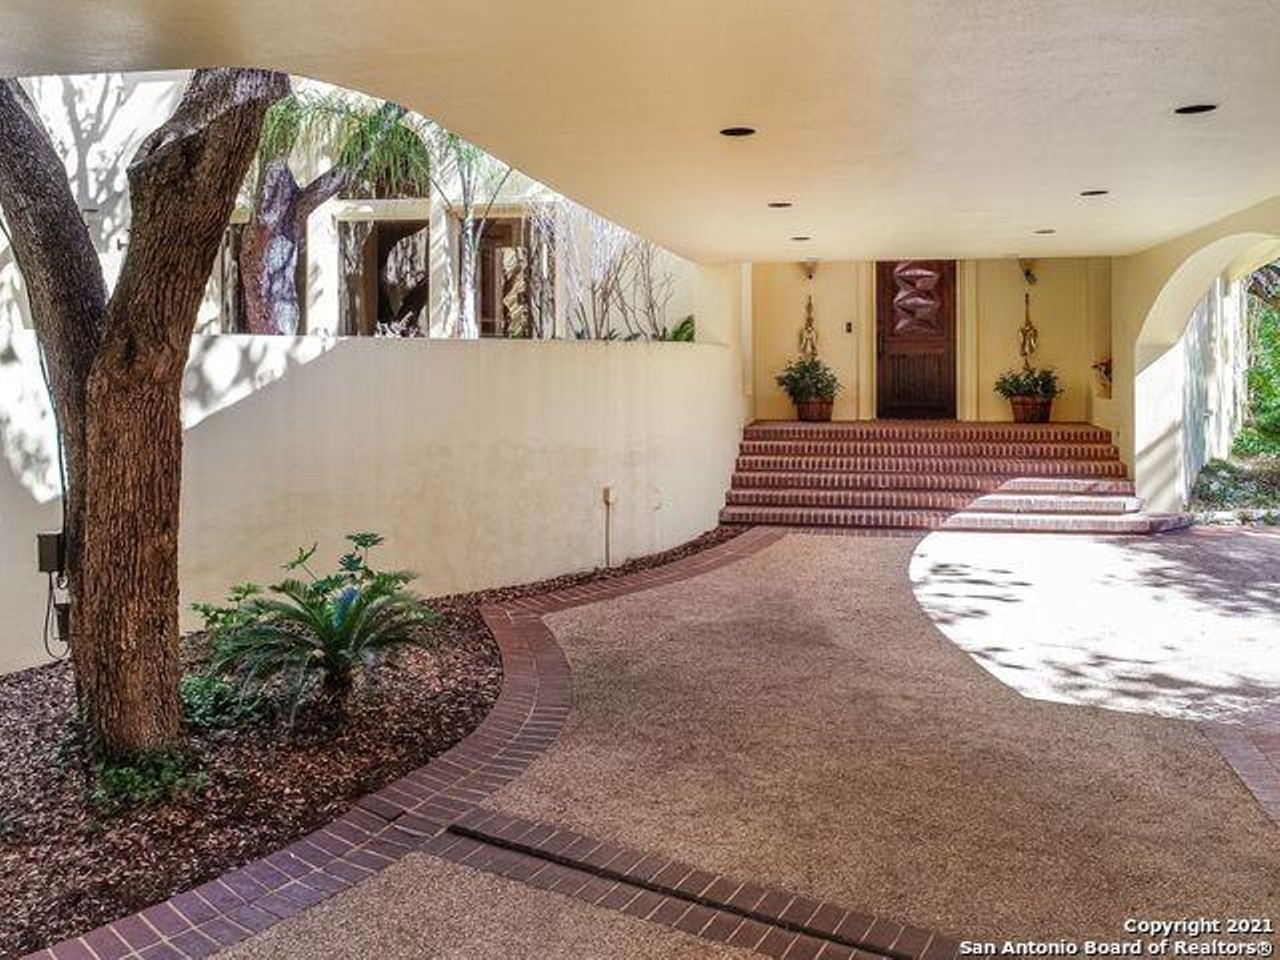 Sushi Zushi's owner is selling this $1.2 million totally '80s mansion in North San Antonio